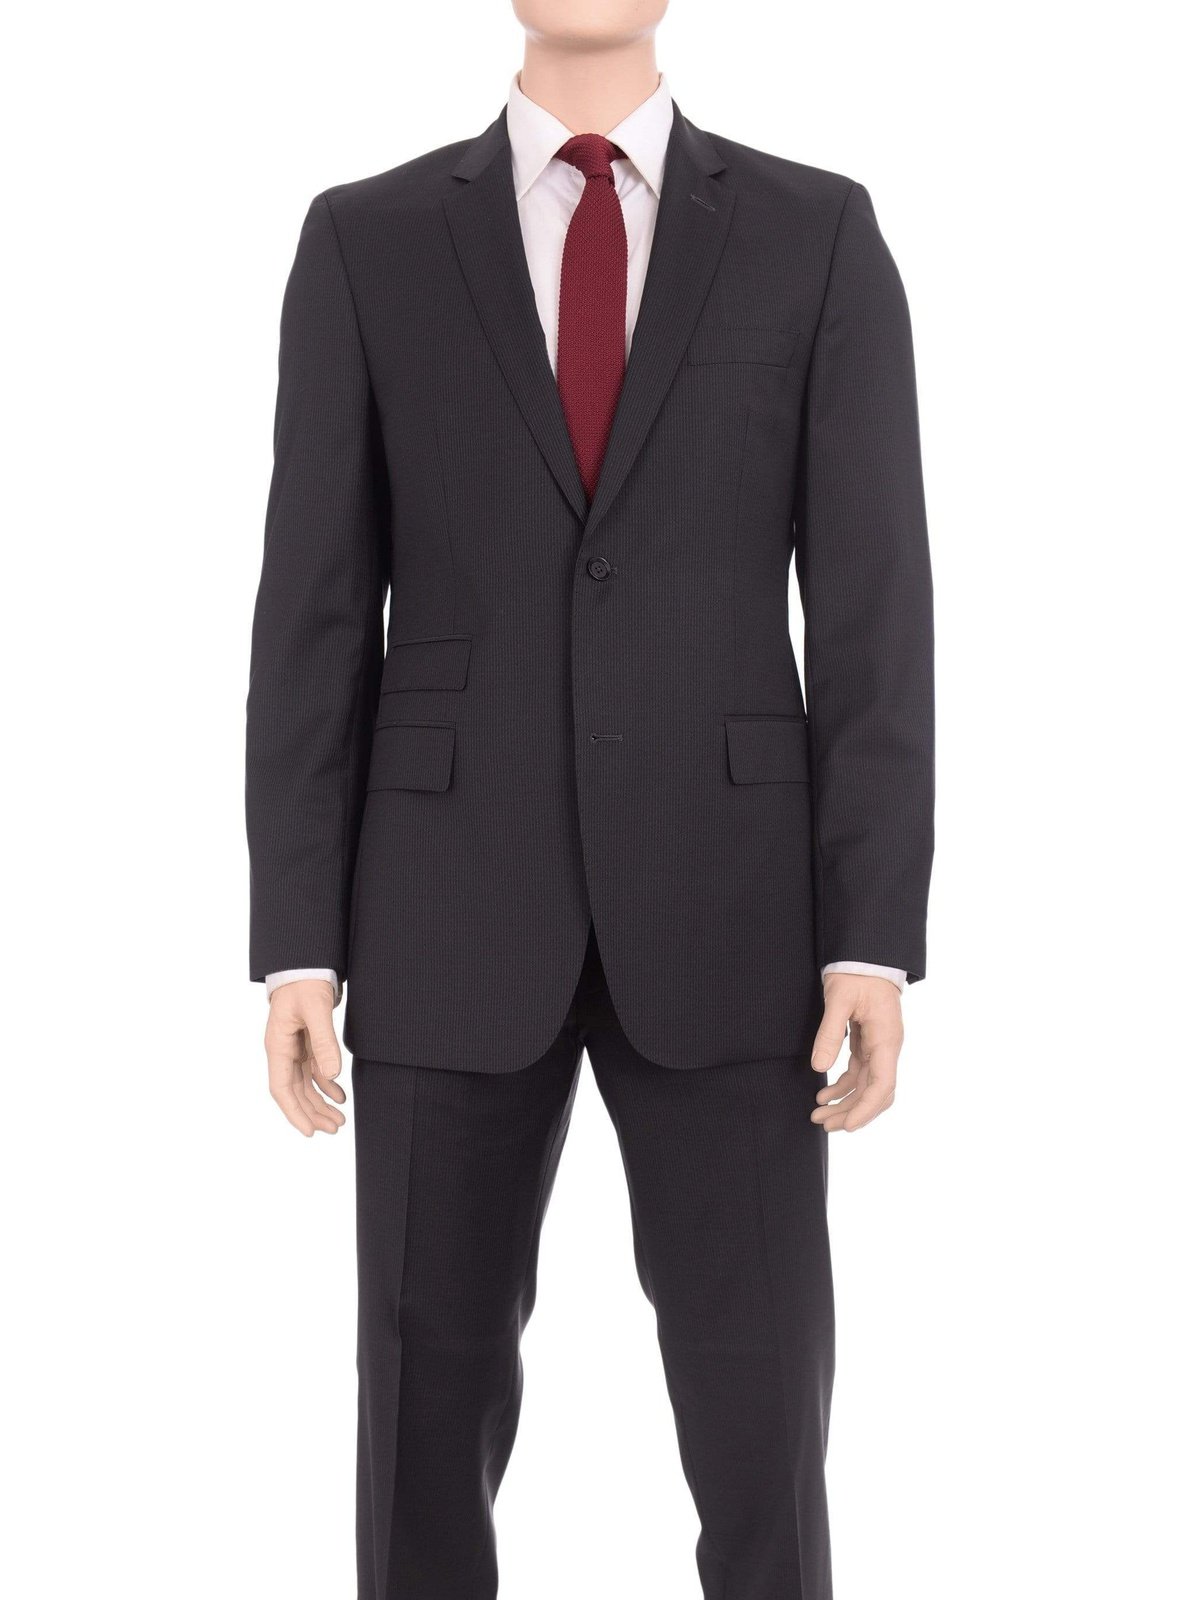 HUGO BOSS TWO PIECE SUITS Hugo Boss Edison/power Classic Fit Black Pinstriped Super 100 Wool Suit